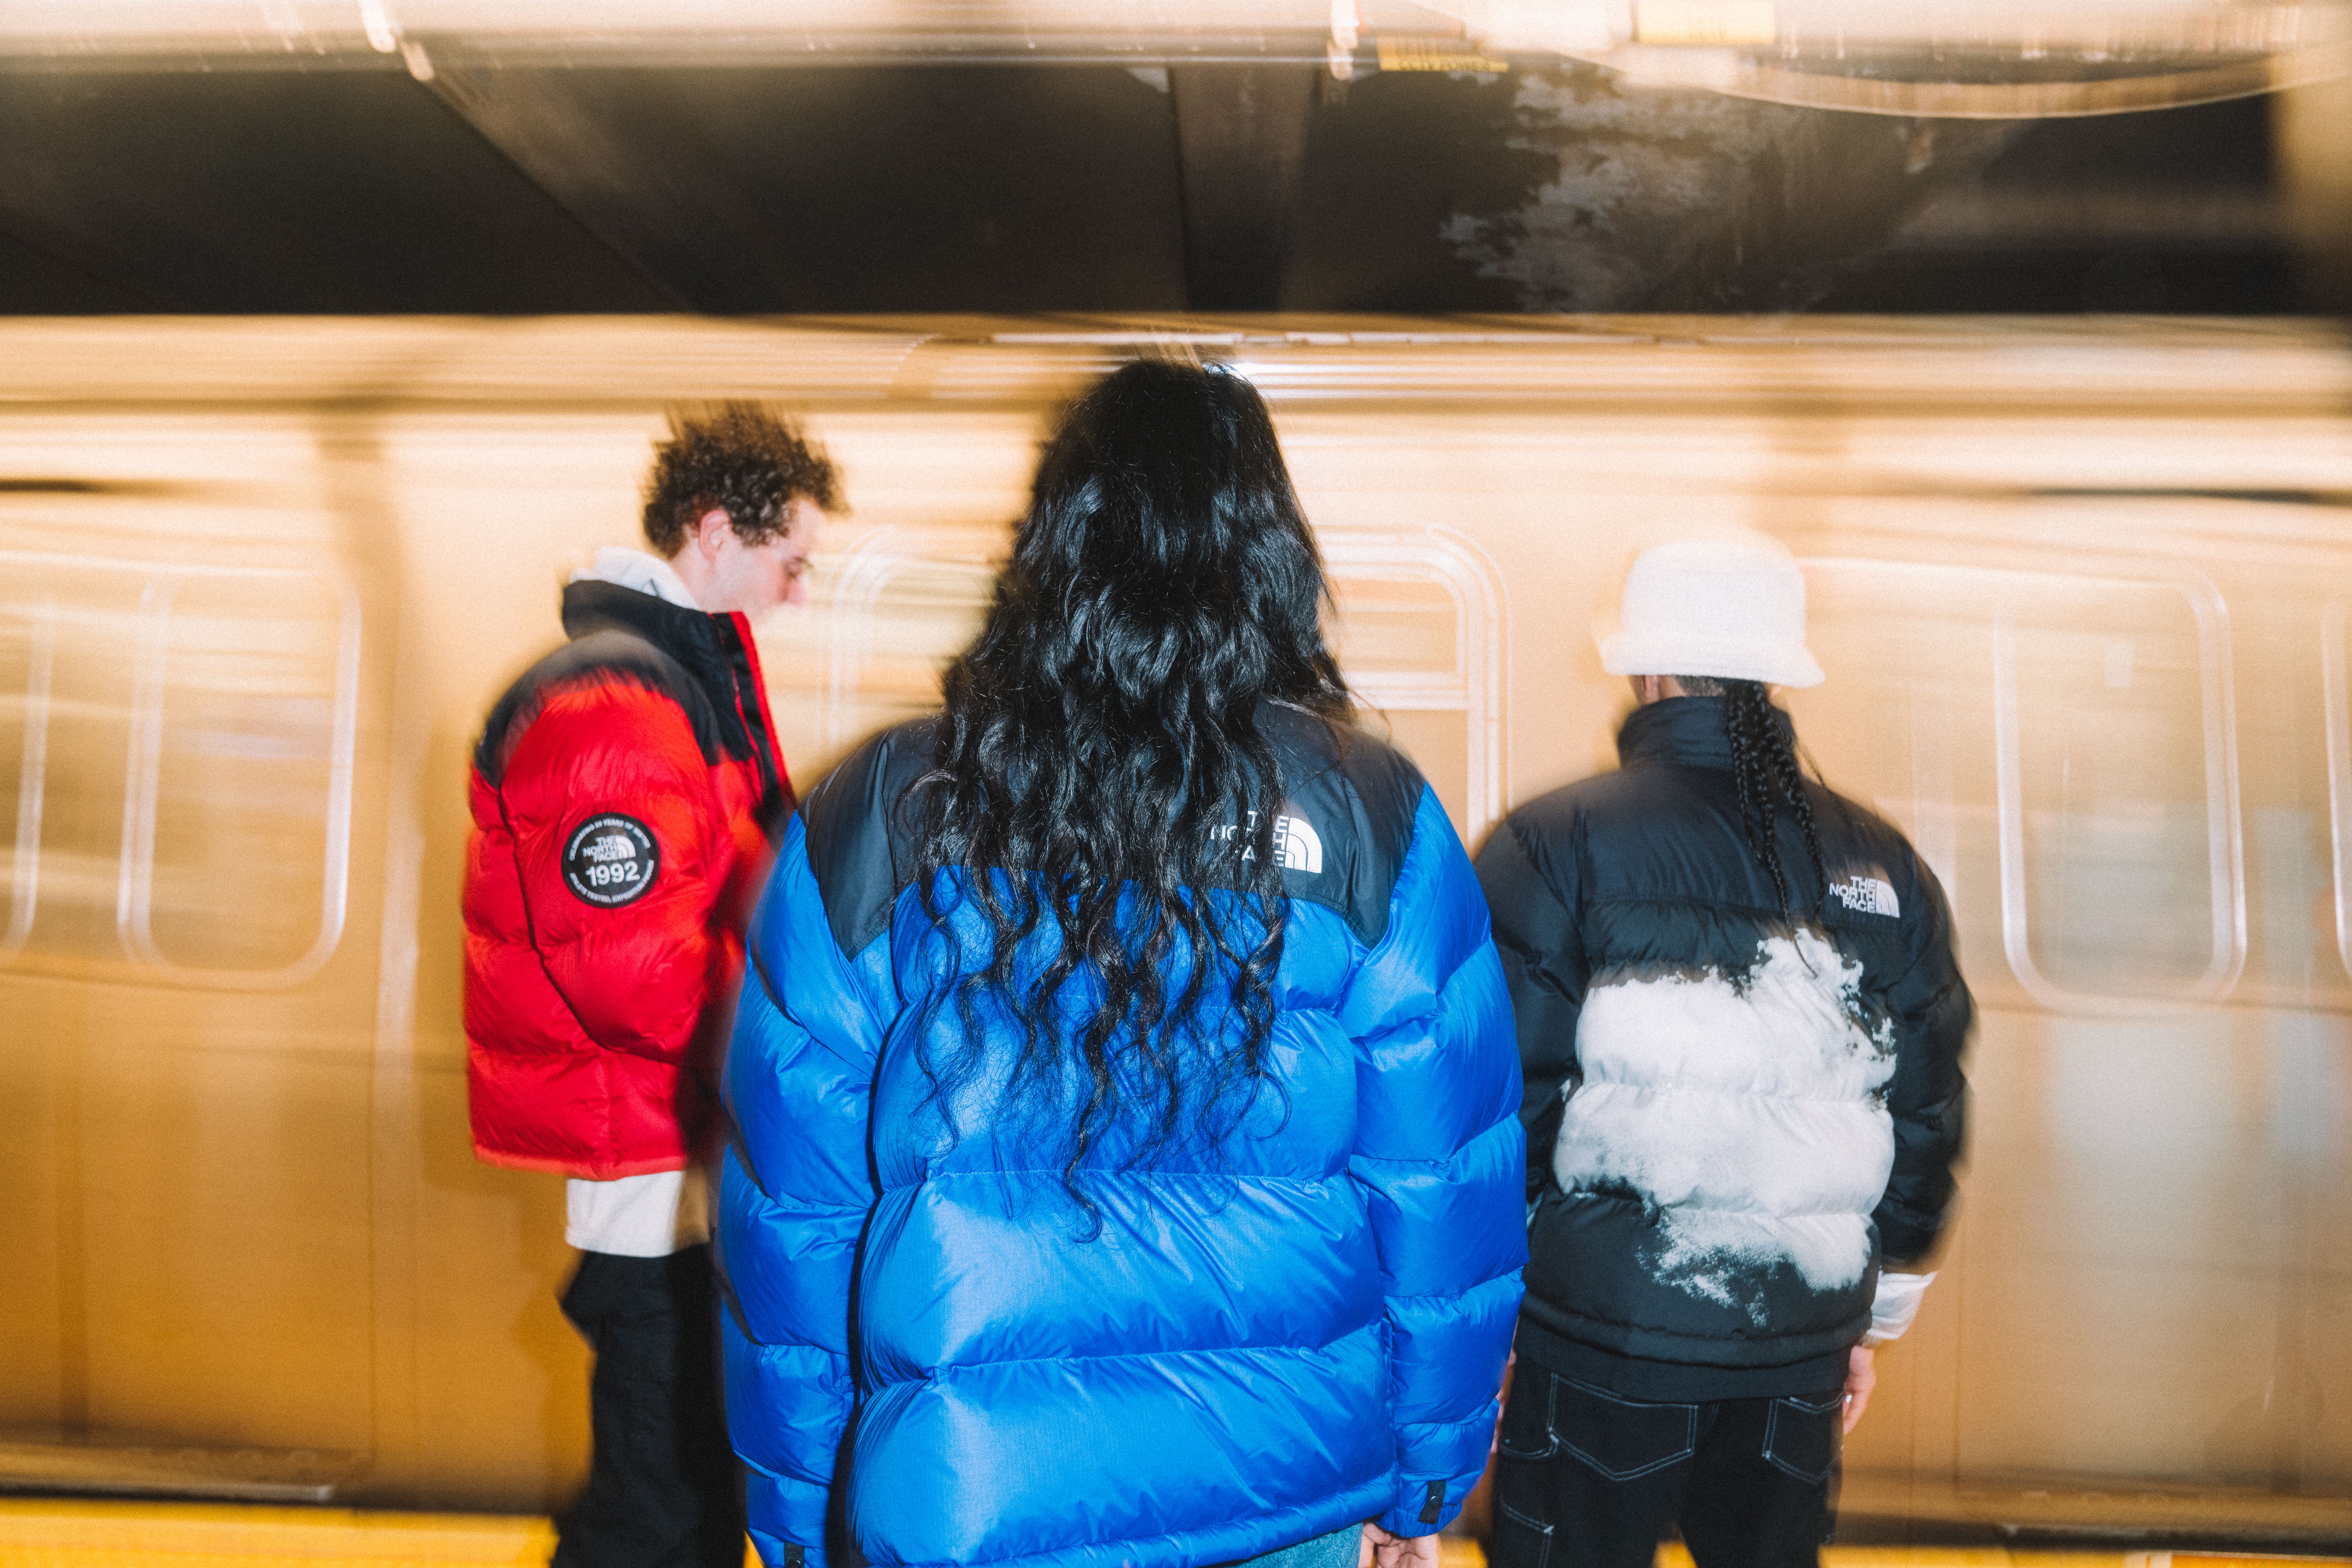 The North Face Nuptse jacket is 30 — here's where to find it in